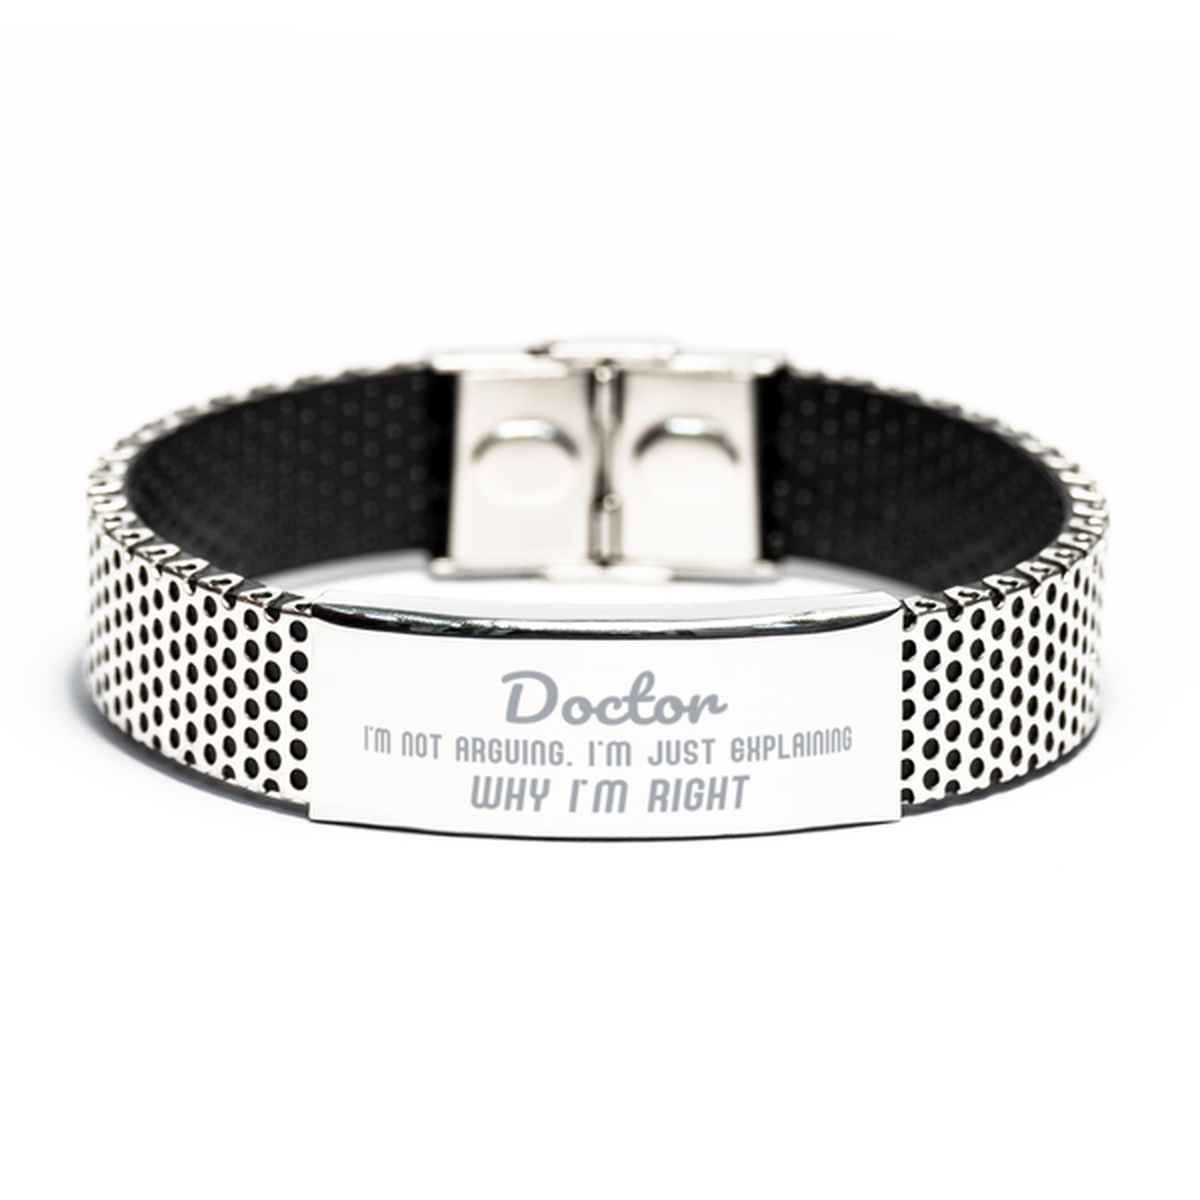 Doctor I'm not Arguing. I'm Just Explaining Why I'm RIGHT Stainless Steel Bracelet, Funny Saying Quote Doctor Gifts For Doctor Graduation Birthday Christmas Gifts for Men Women Coworker